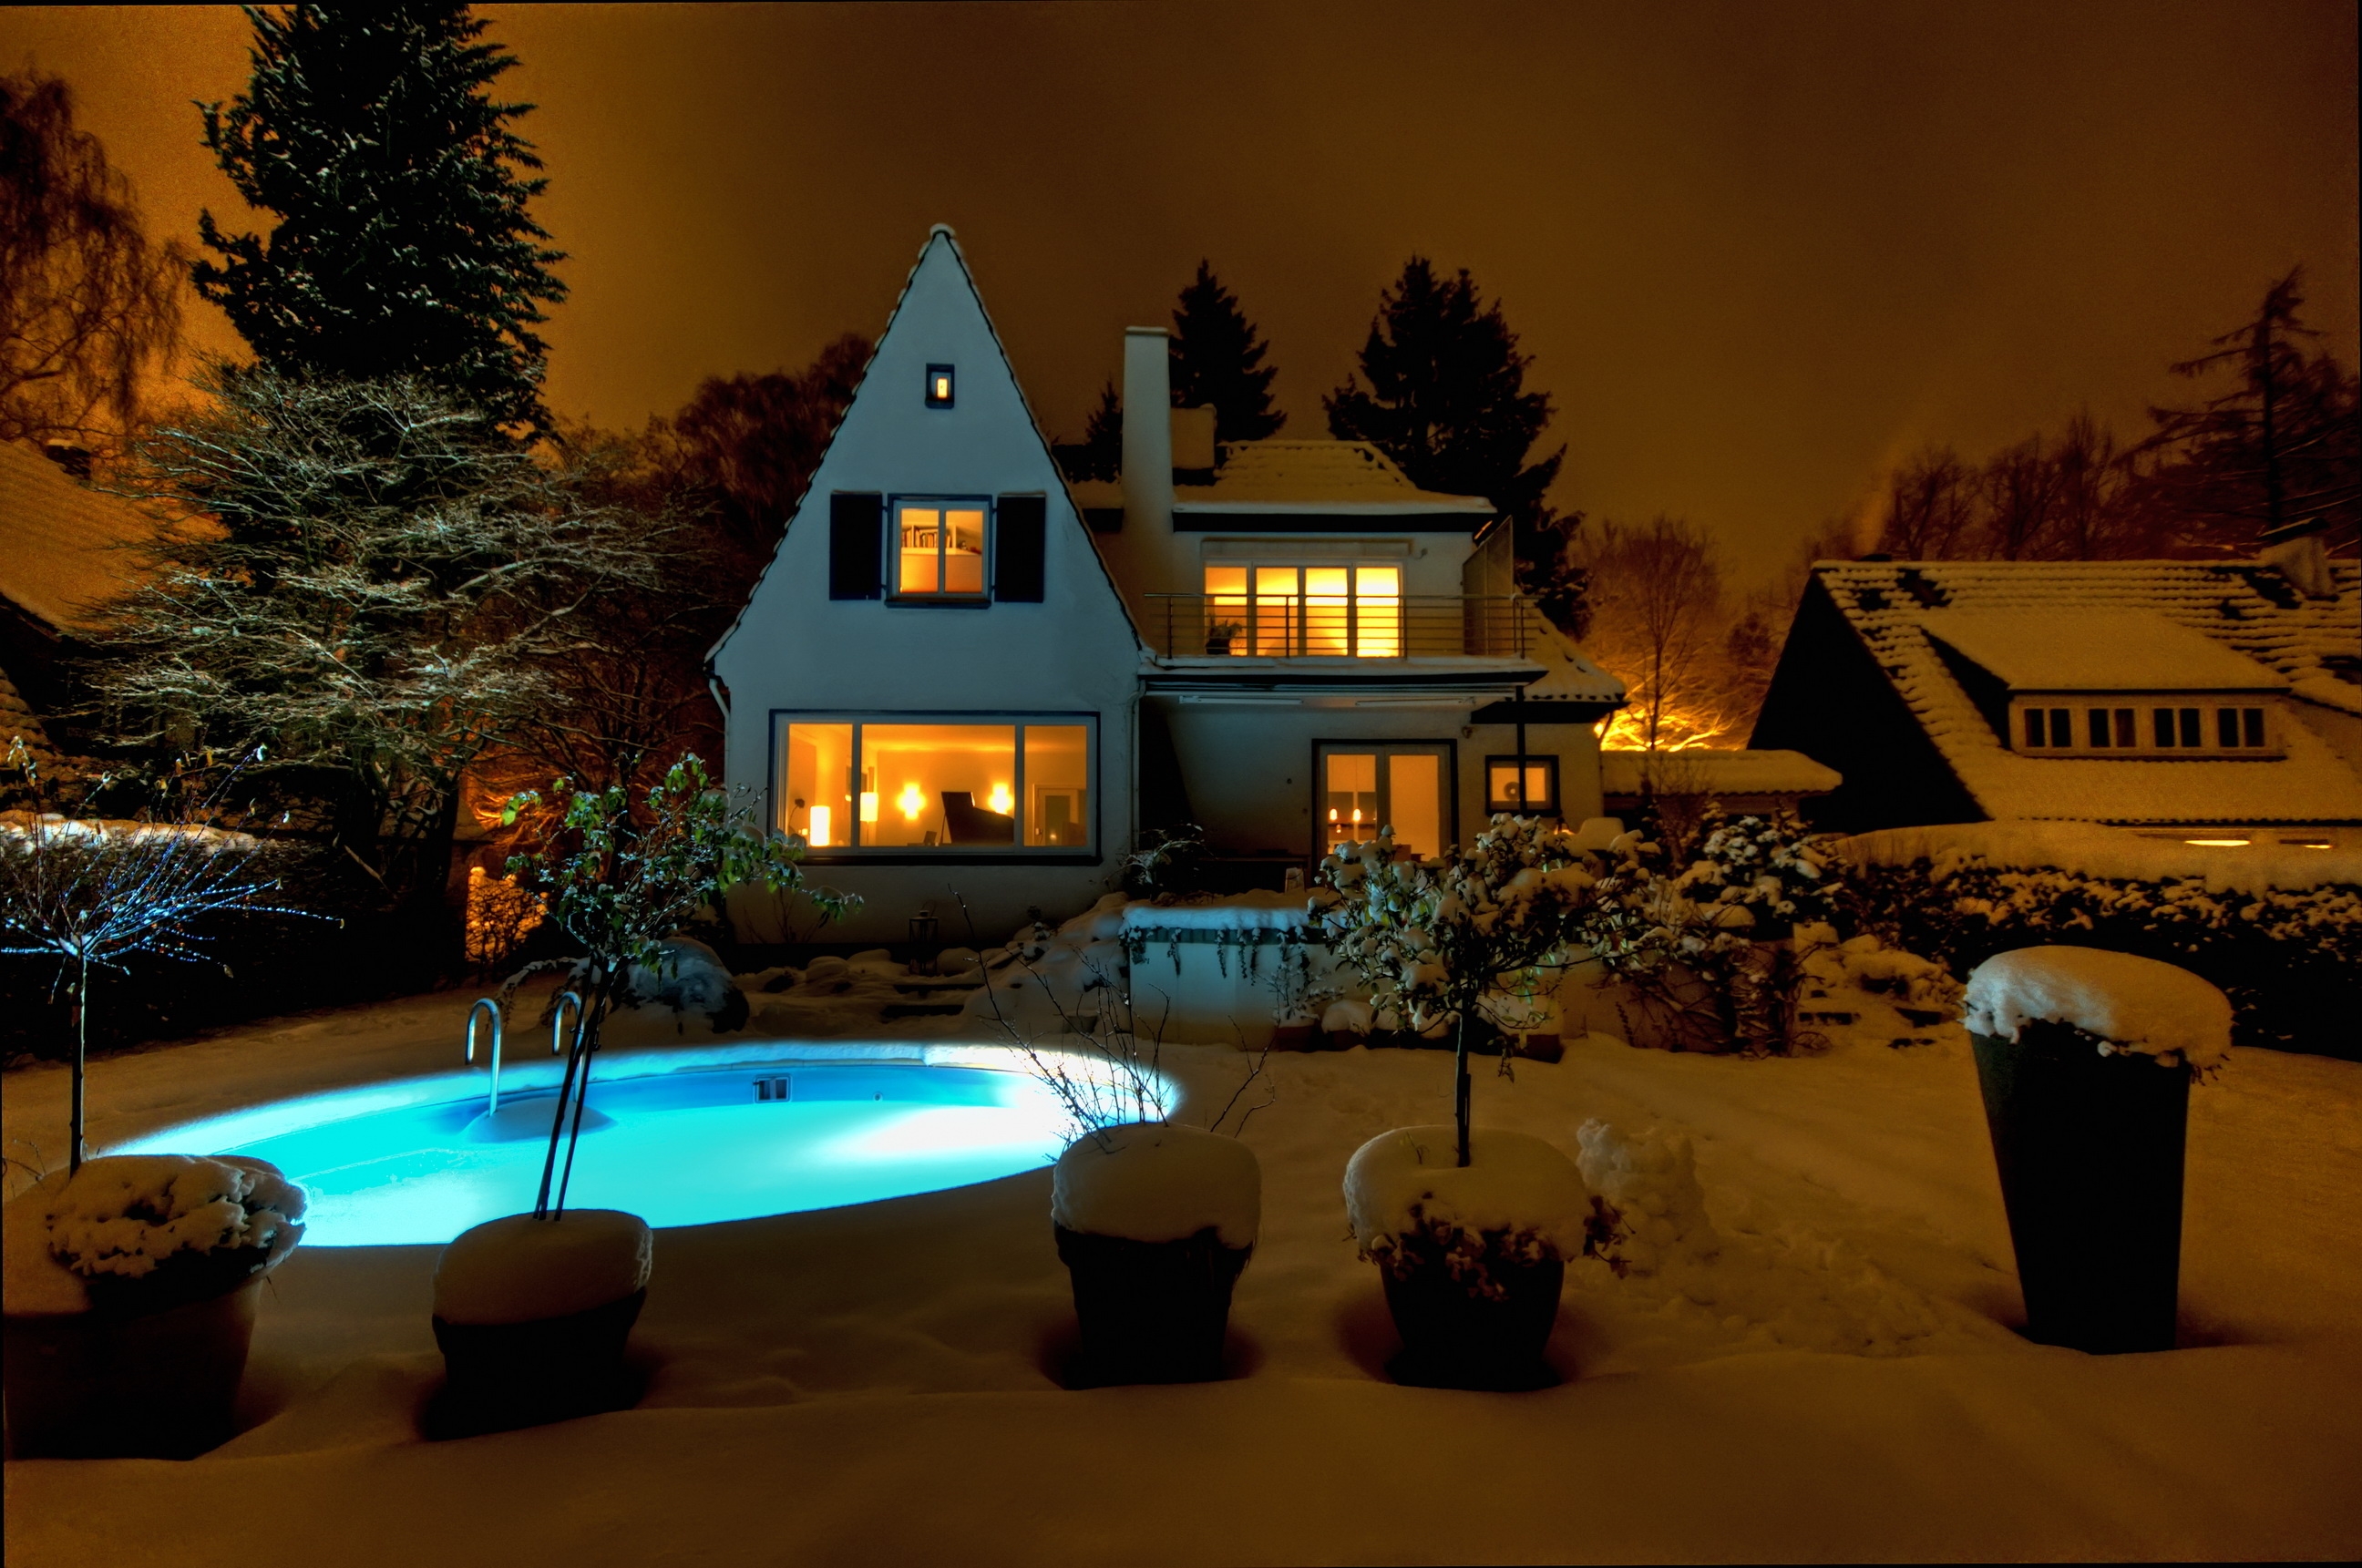 houses, cities, night, snow, mansion, pools UHD